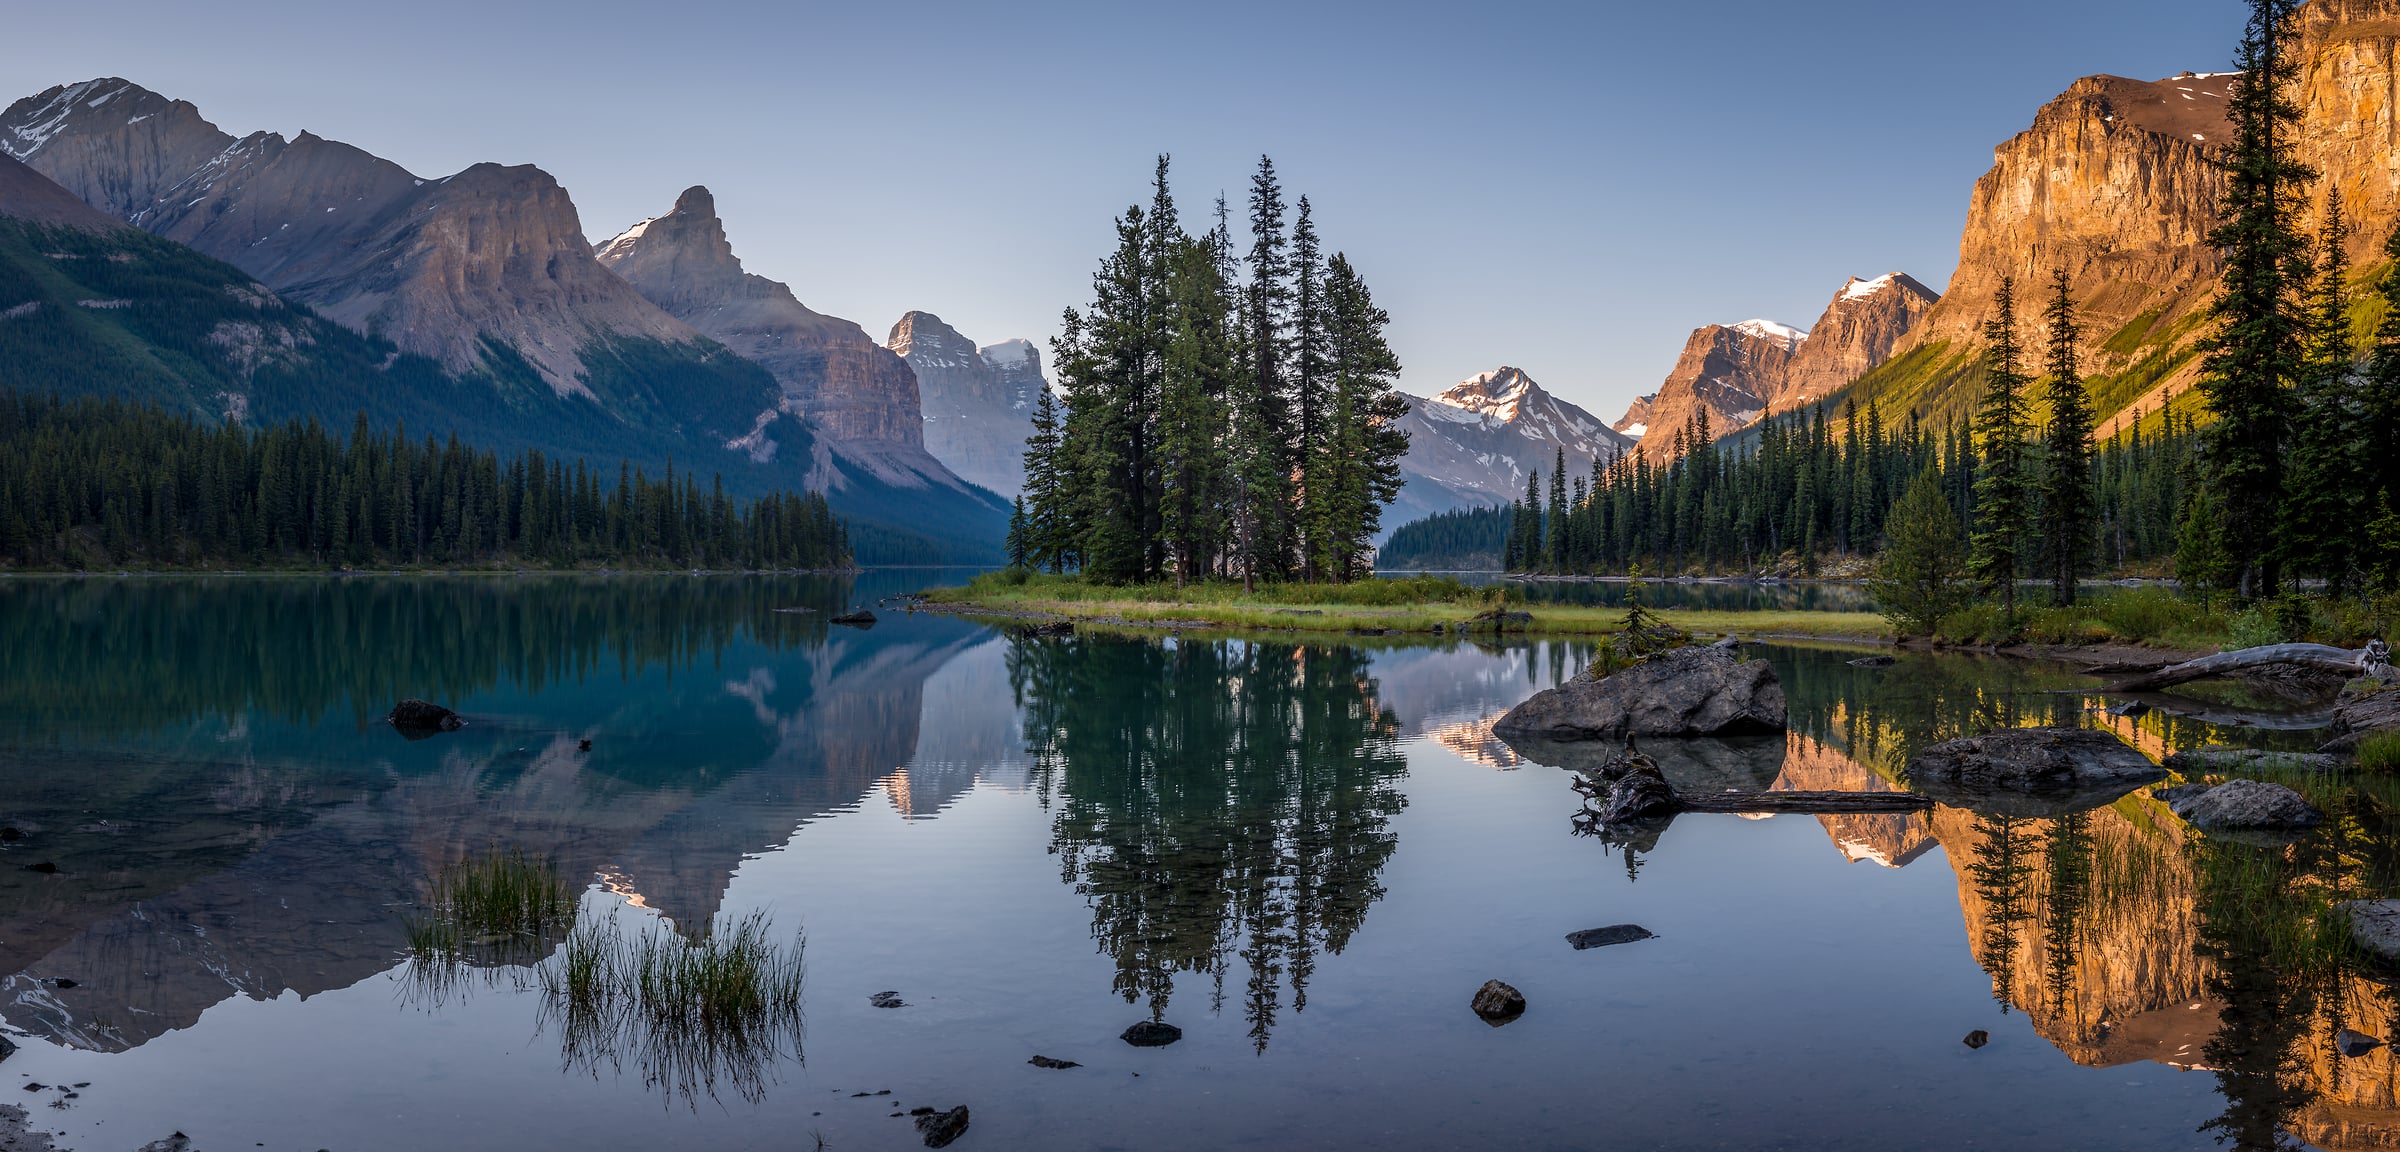 90 megapixels! A very high resolution, large-format VAST photo print of Maligne Lake, Jasper National Park, Canada; nature landscape photo created by Tim Shields